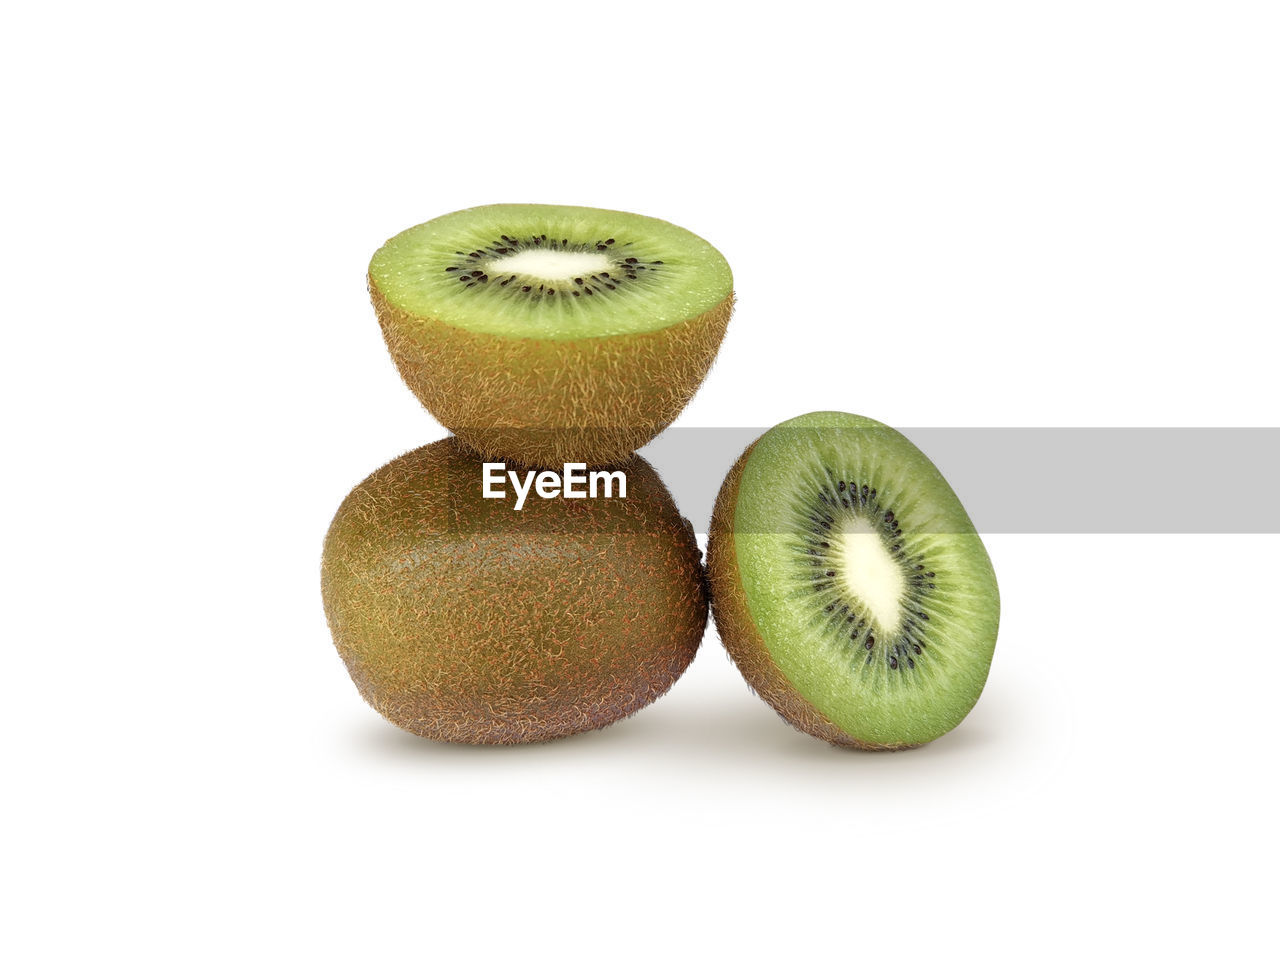 kiwifruit, healthy eating, fruit, food, food and drink, kiwi, wellbeing, freshness, produce, cross section, studio shot, cut out, white background, green, slice, indoors, plant, no people, still life, group of objects, organic, vitamin, halved